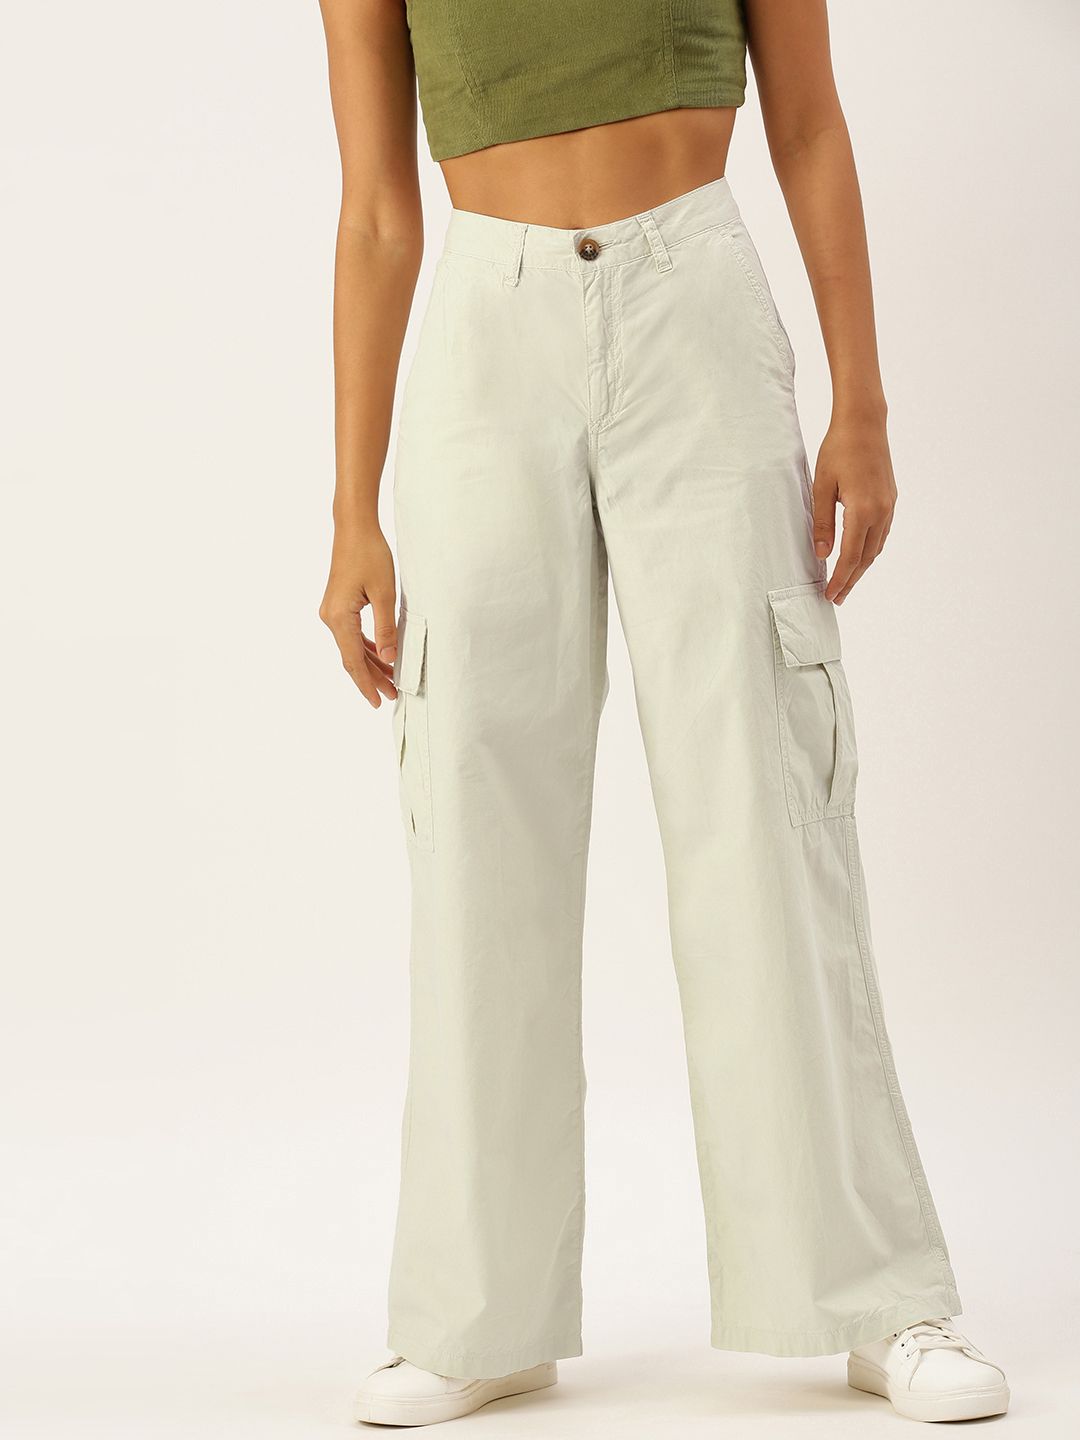 FOREVER 21 Women Grey Solid Pure Cotton Cargos Trousers Price in India